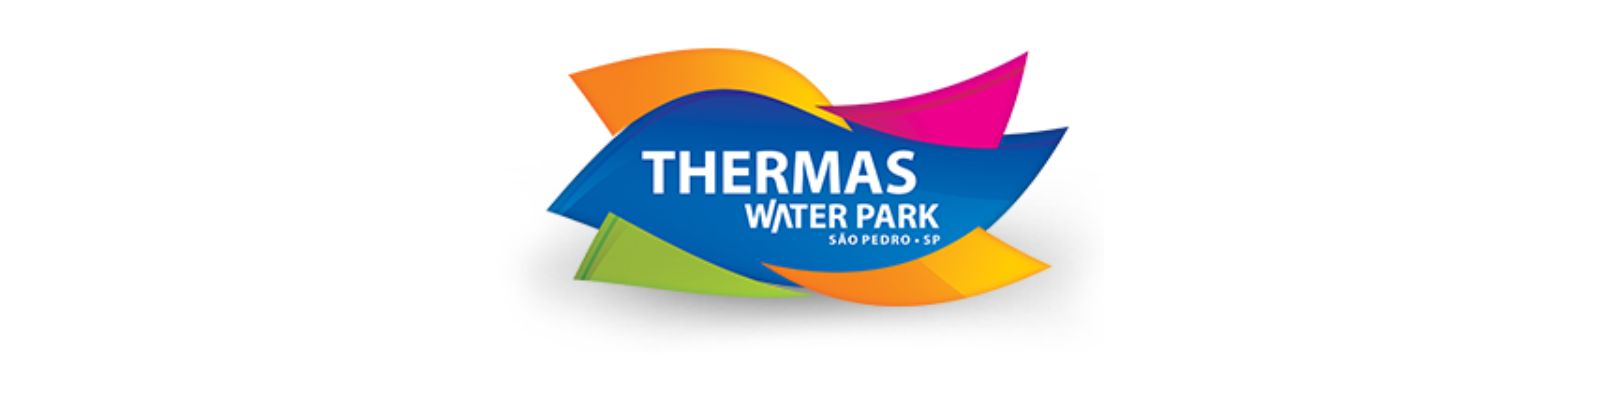 WhatsApp Thermas Water Park: Chat Online, Atendimento!